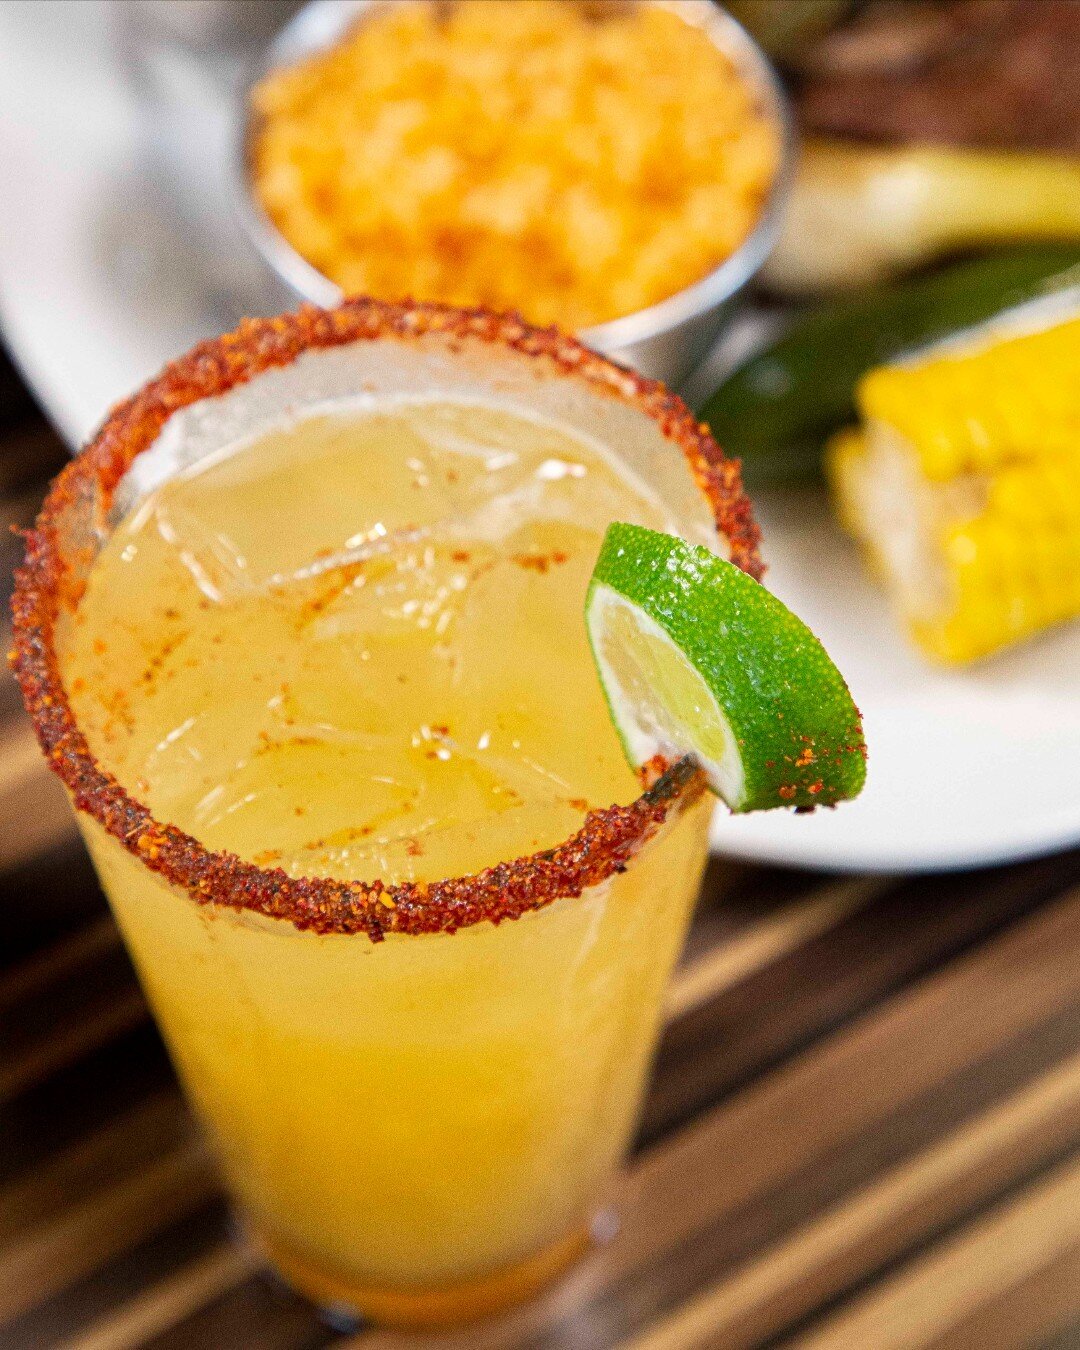 Nothing like a good handcrafted cocktail to start celebrating the weekend 🍹

#ayetoronc #drink #cocktail #mexicanfood #mexicanrestaurant #weekend